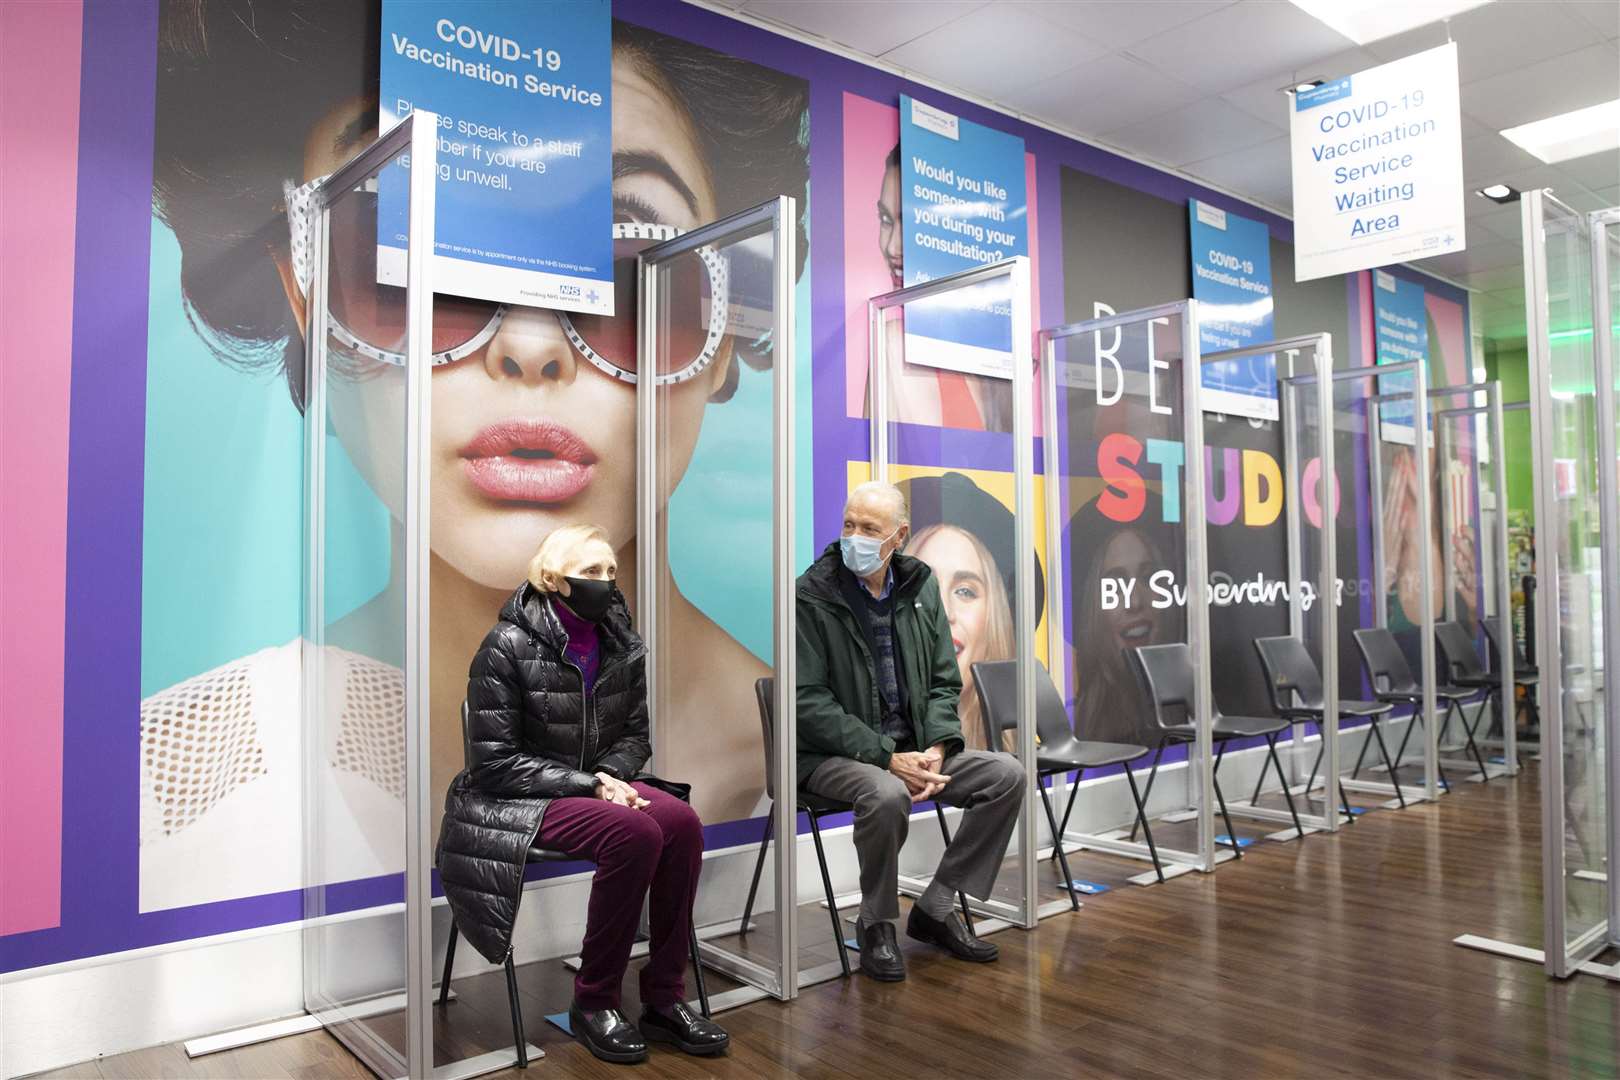 Patients wait to receive the AstraZeneca/Oxford Covid-19 vaccine at Superdrug in Guildford (Matt Alexander/PA)